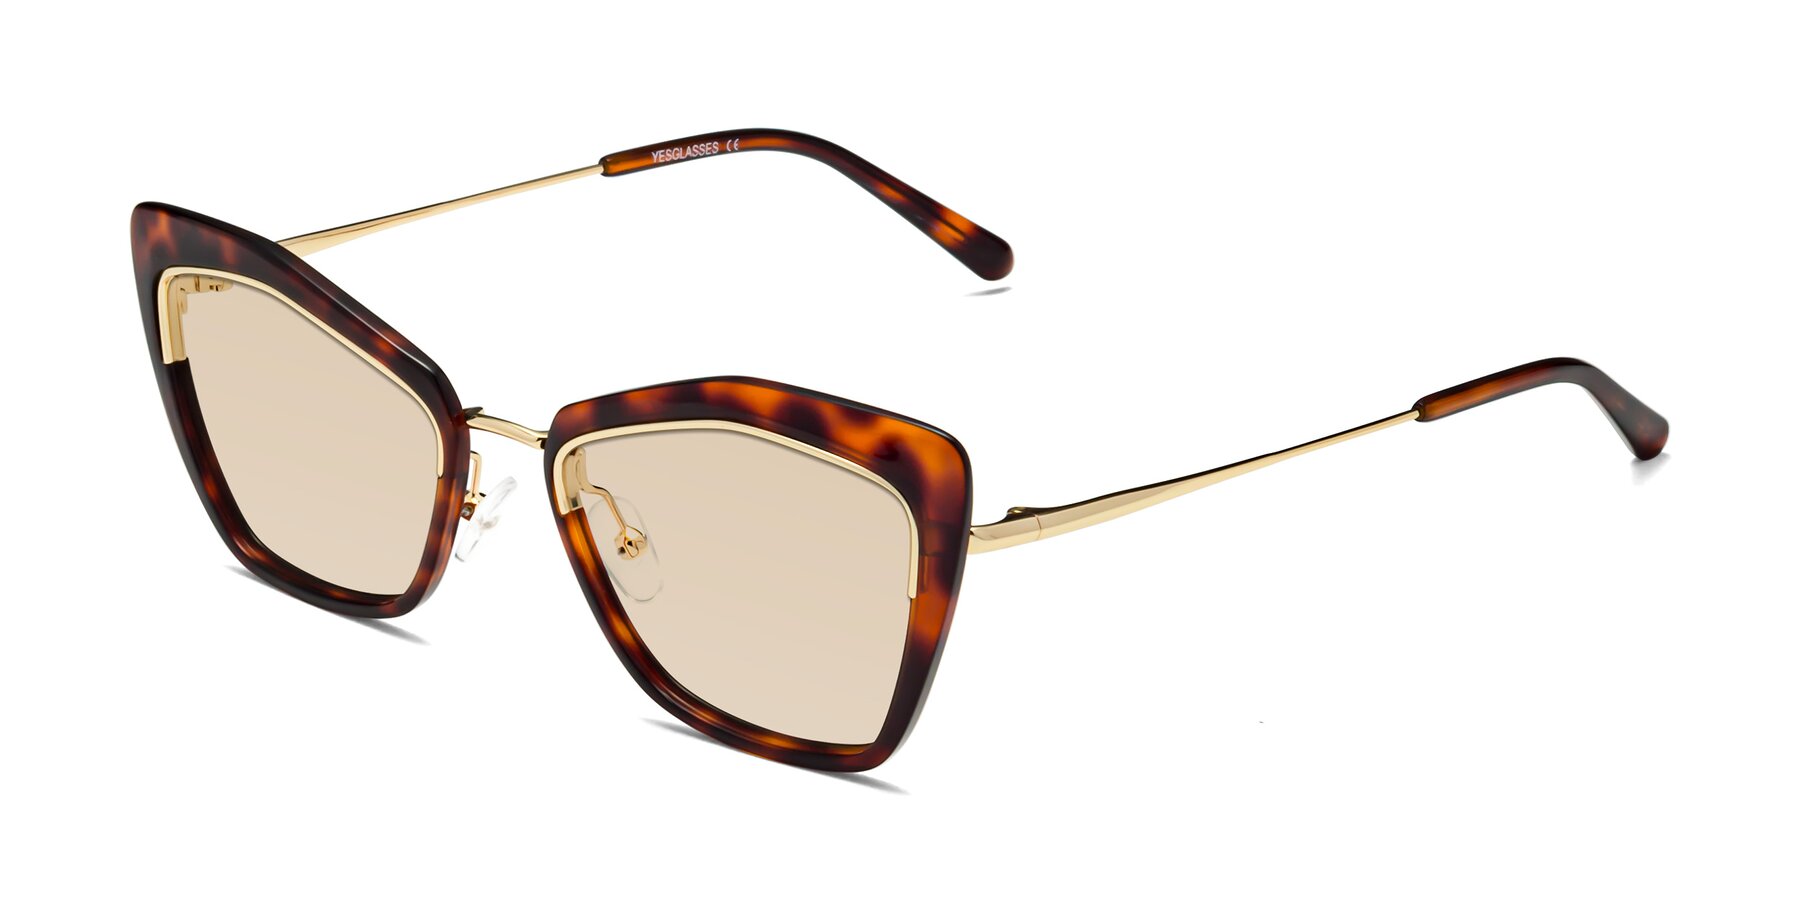 Angle of Lasso in Light Tortoise with Light Brown Tinted Lenses